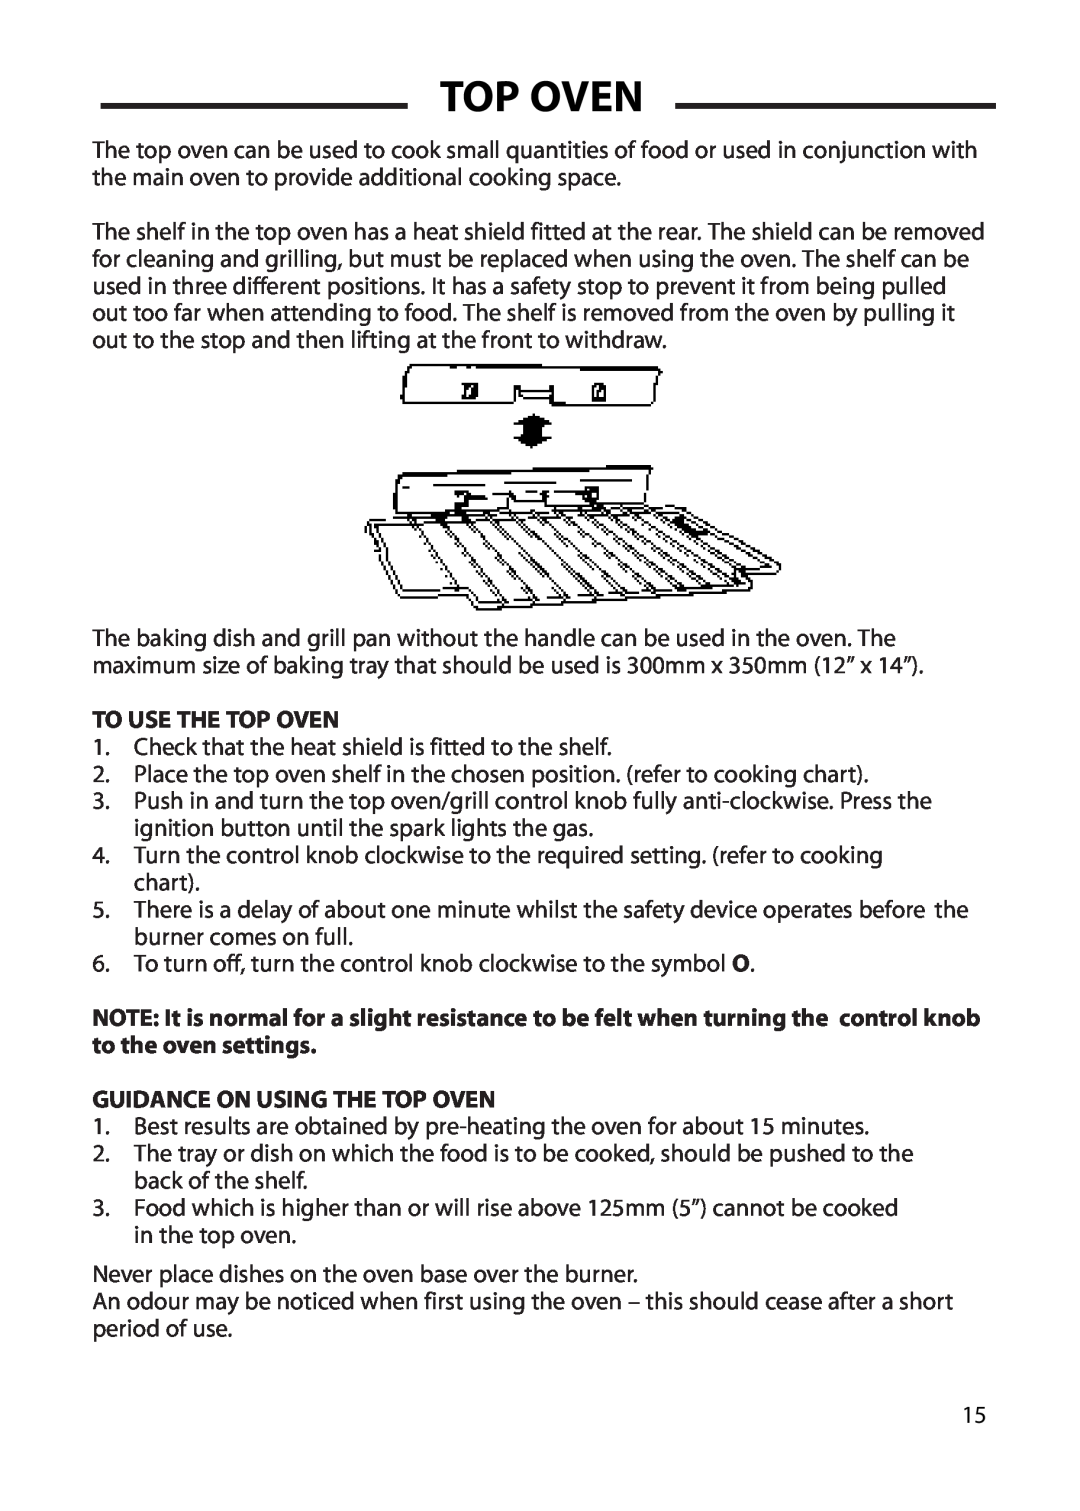 Cannon 10562G, 10566G, 10565G, 10560G installation instructions To Use The Top Oven, Guidance On Using The Top Oven 